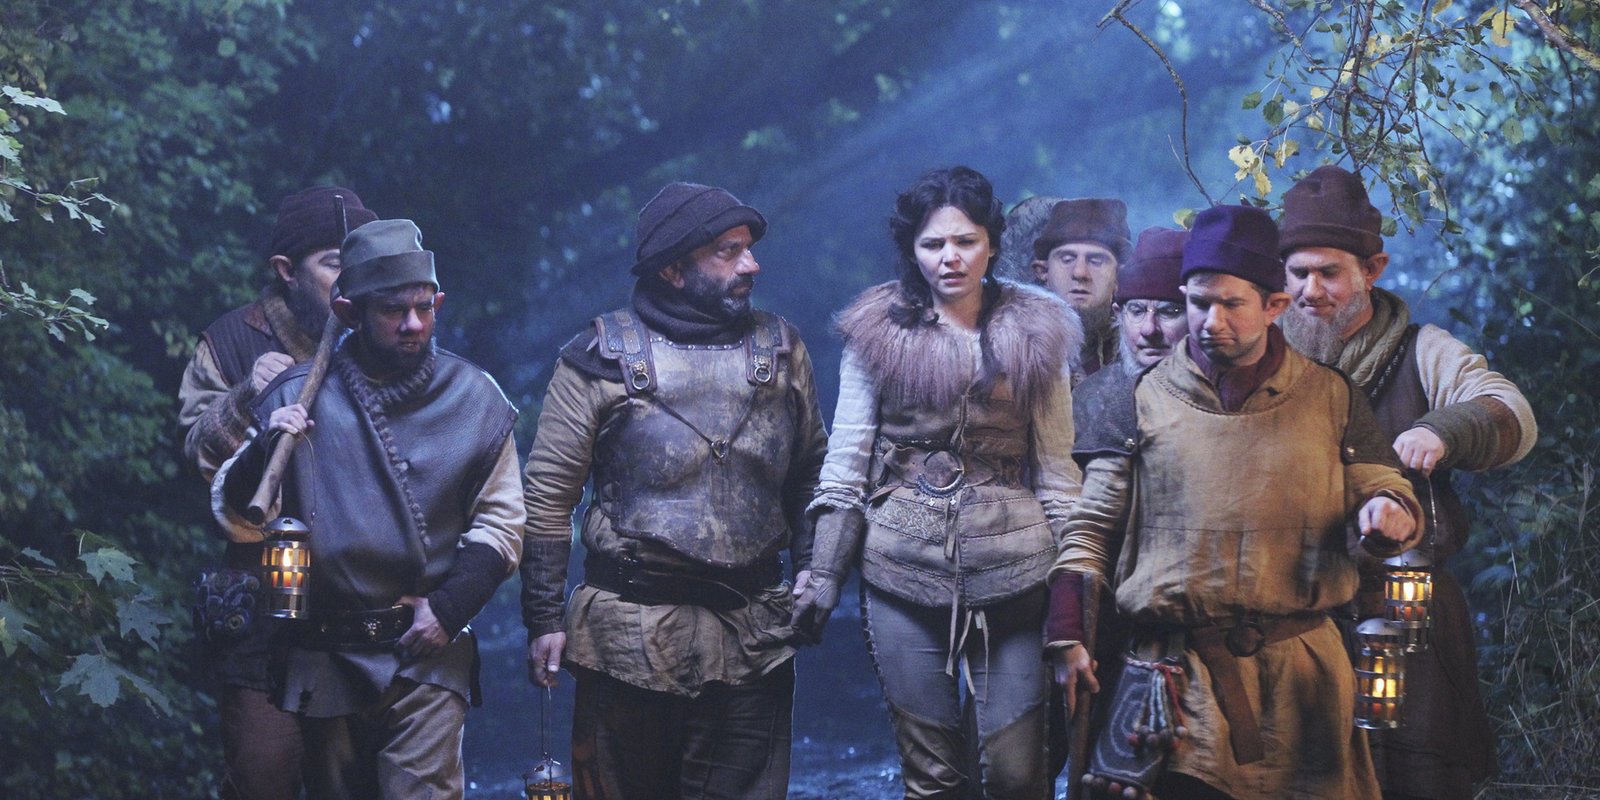 Once Upon a Time - Staffel 3